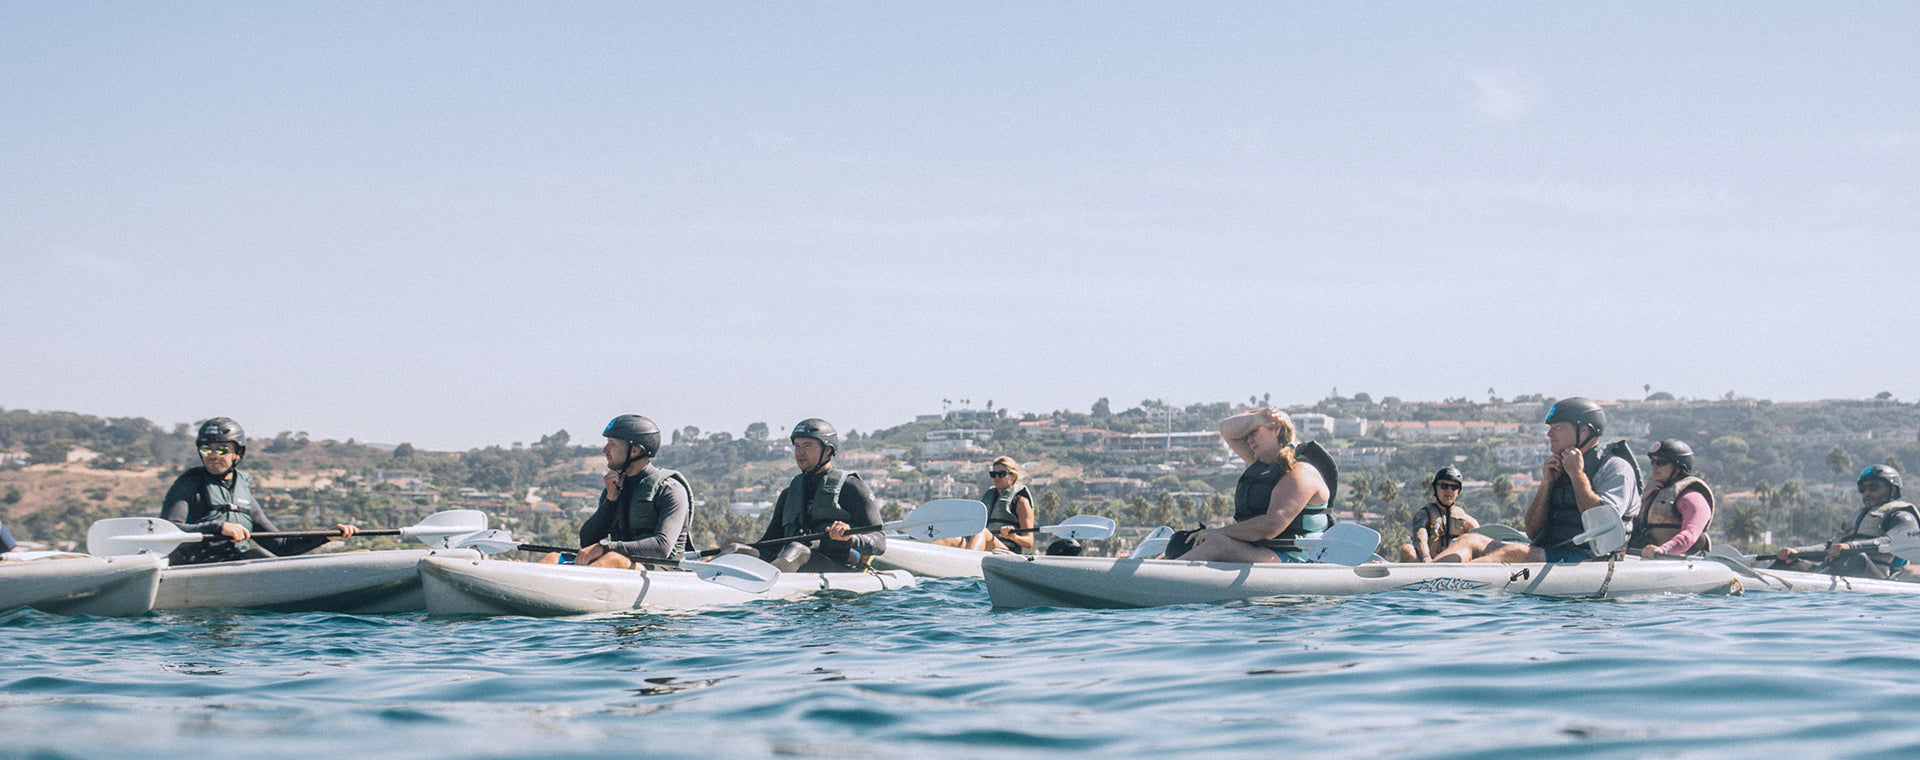 A private group kayak tour in San Diego with Everyday California for the ultimate bonding experience with others on the ocean.  